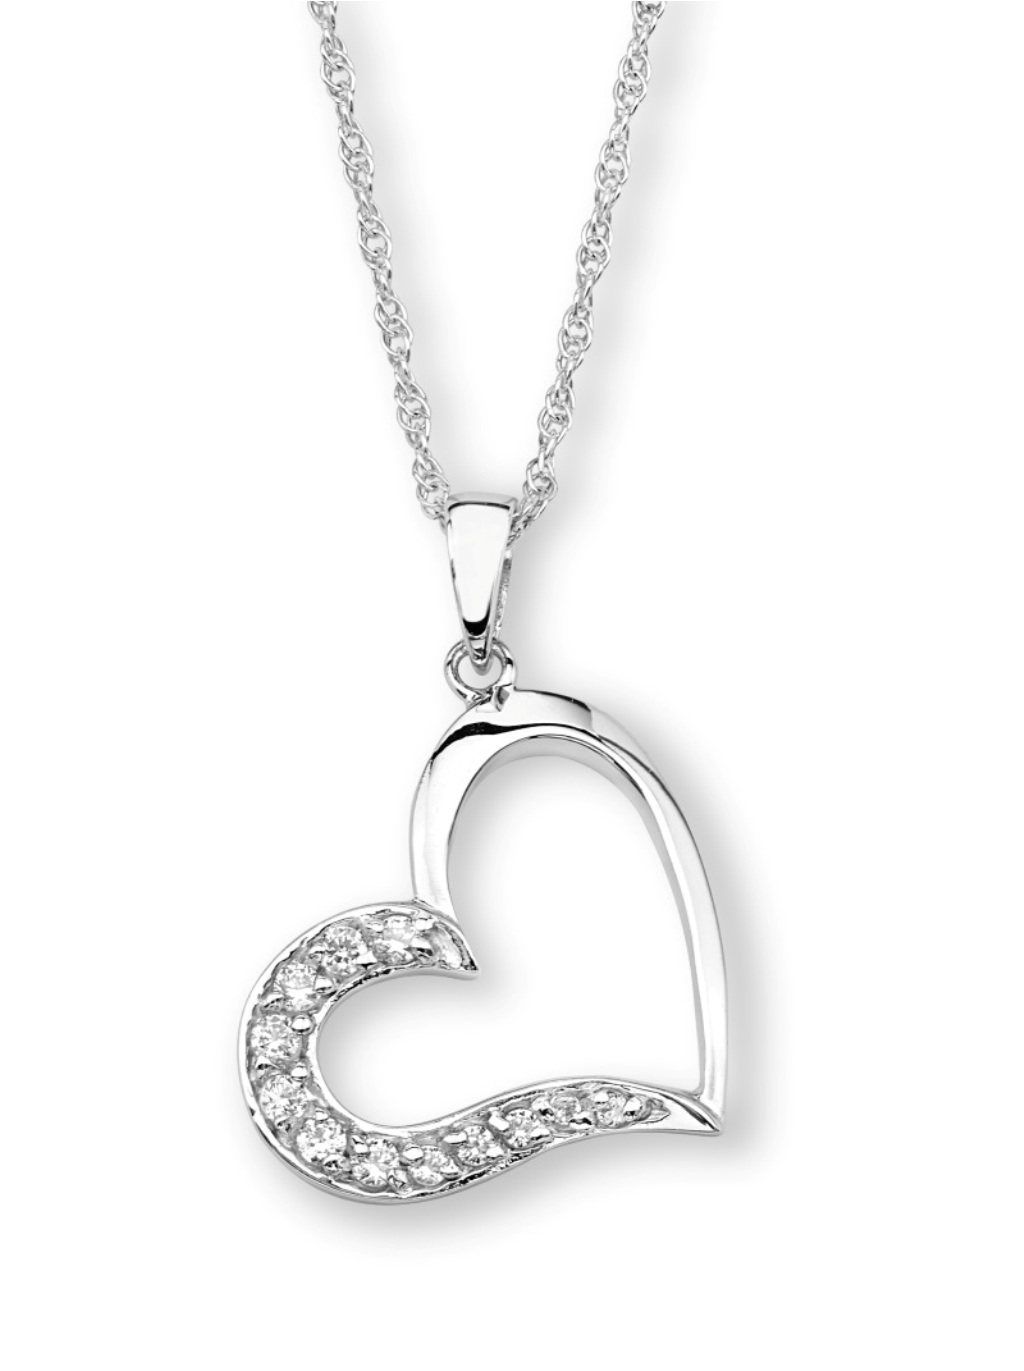  Graduated CZ Heart Pendant Necklace, Rhodium Plated Sterling Silver, 18